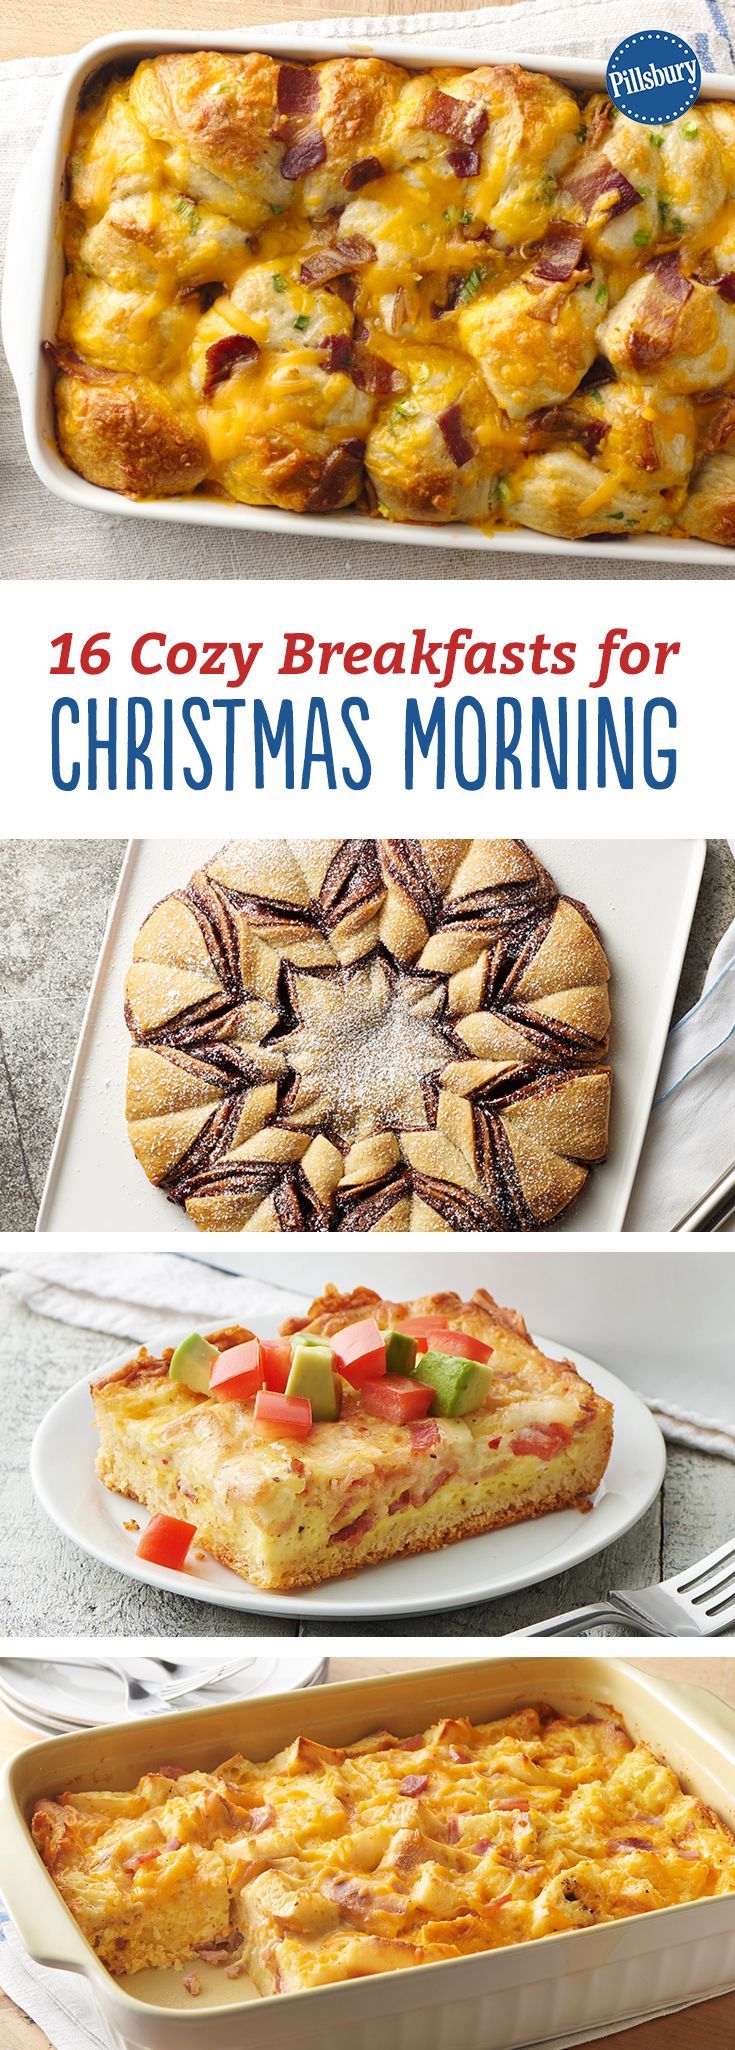 16 Cozy Breakfasts for Christmas Morning: Get through Christmas morning chaos with these simple but special breakfasts.